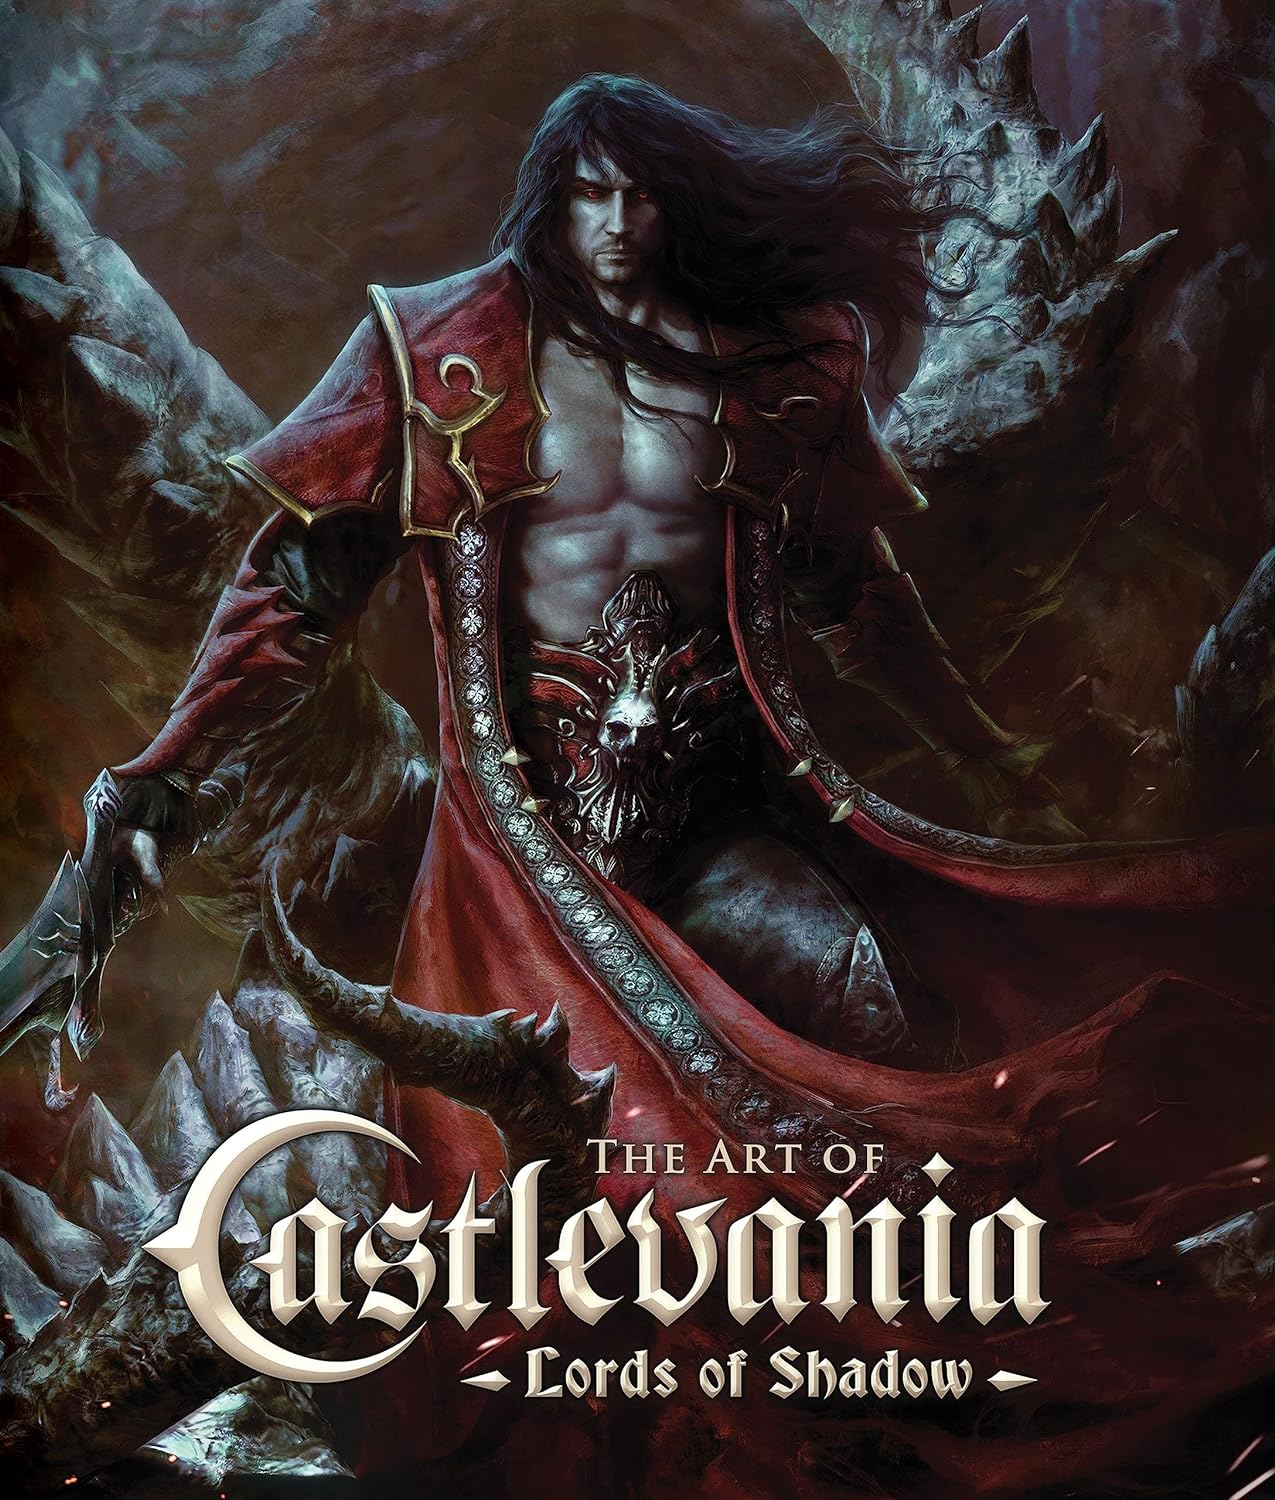 The Art of Castlevania: Lords of Shadow Hardcover (2014)